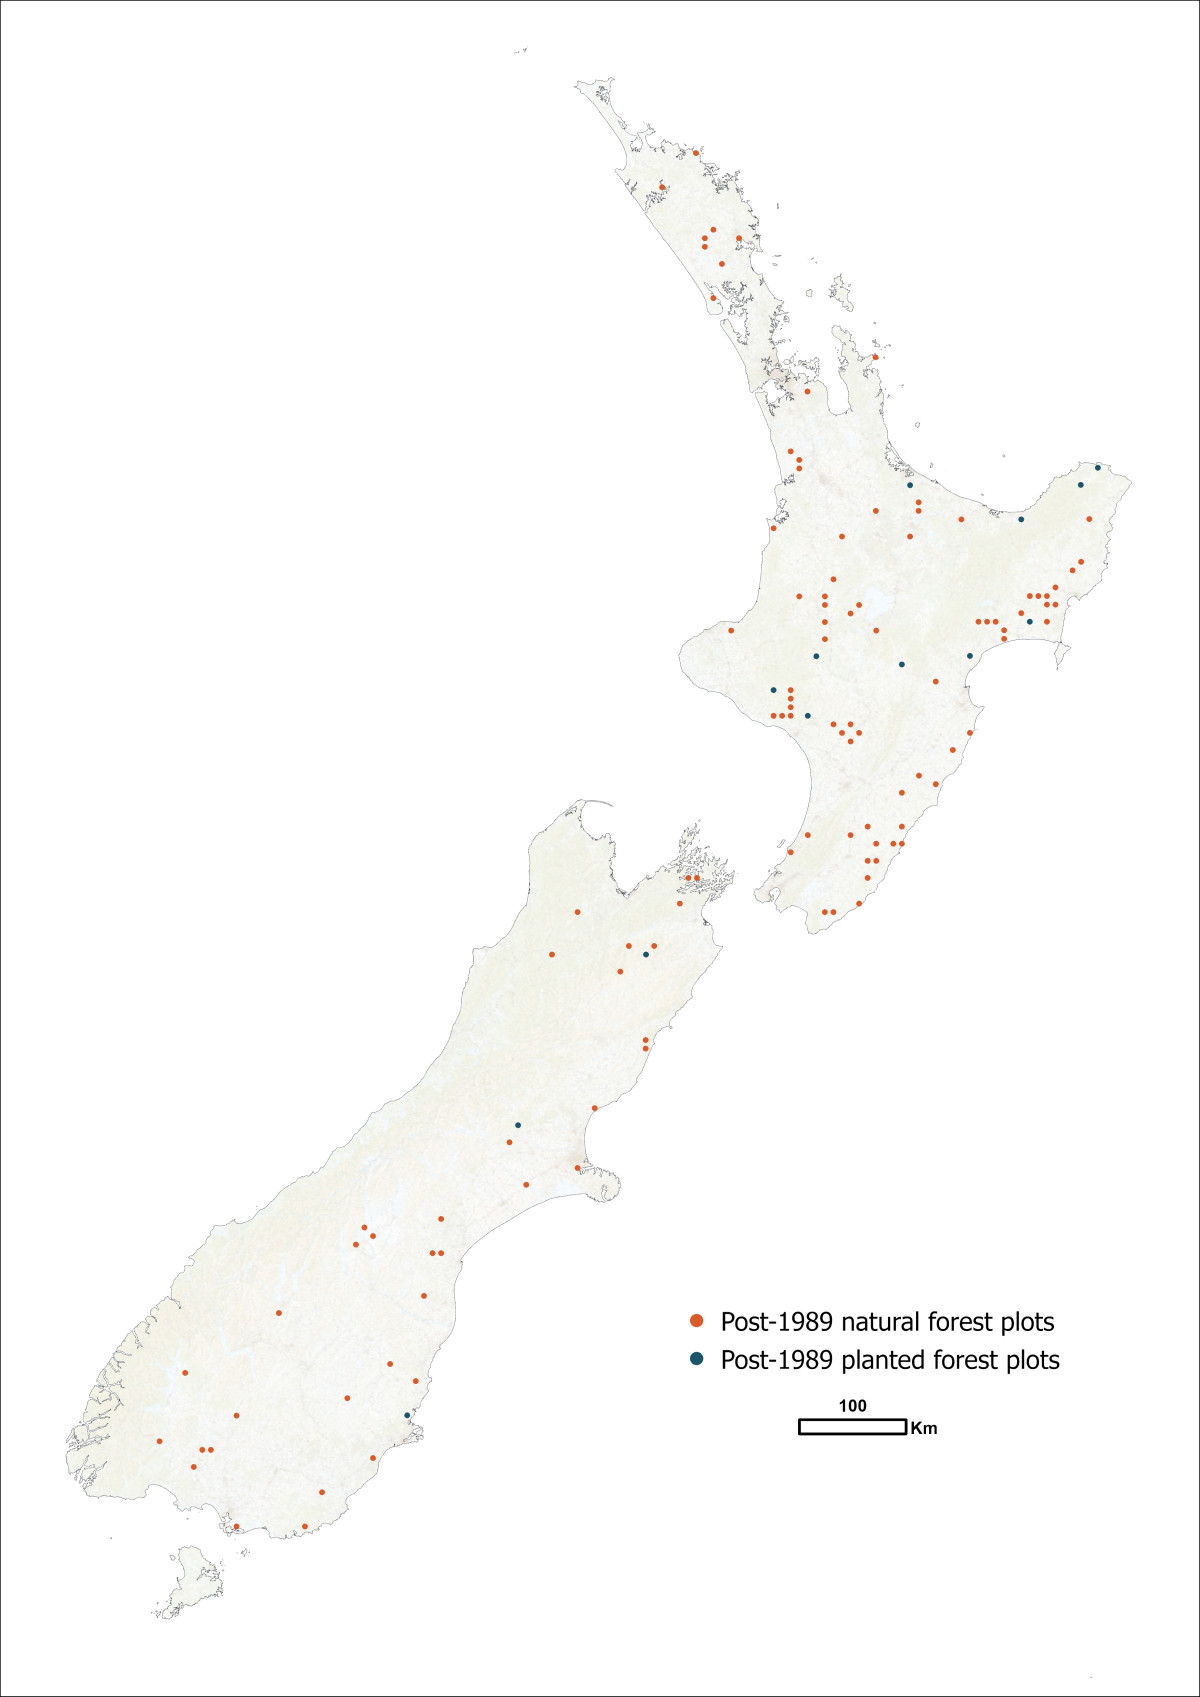 Location of forest sampling plots in post-1989 forests in New Zealand